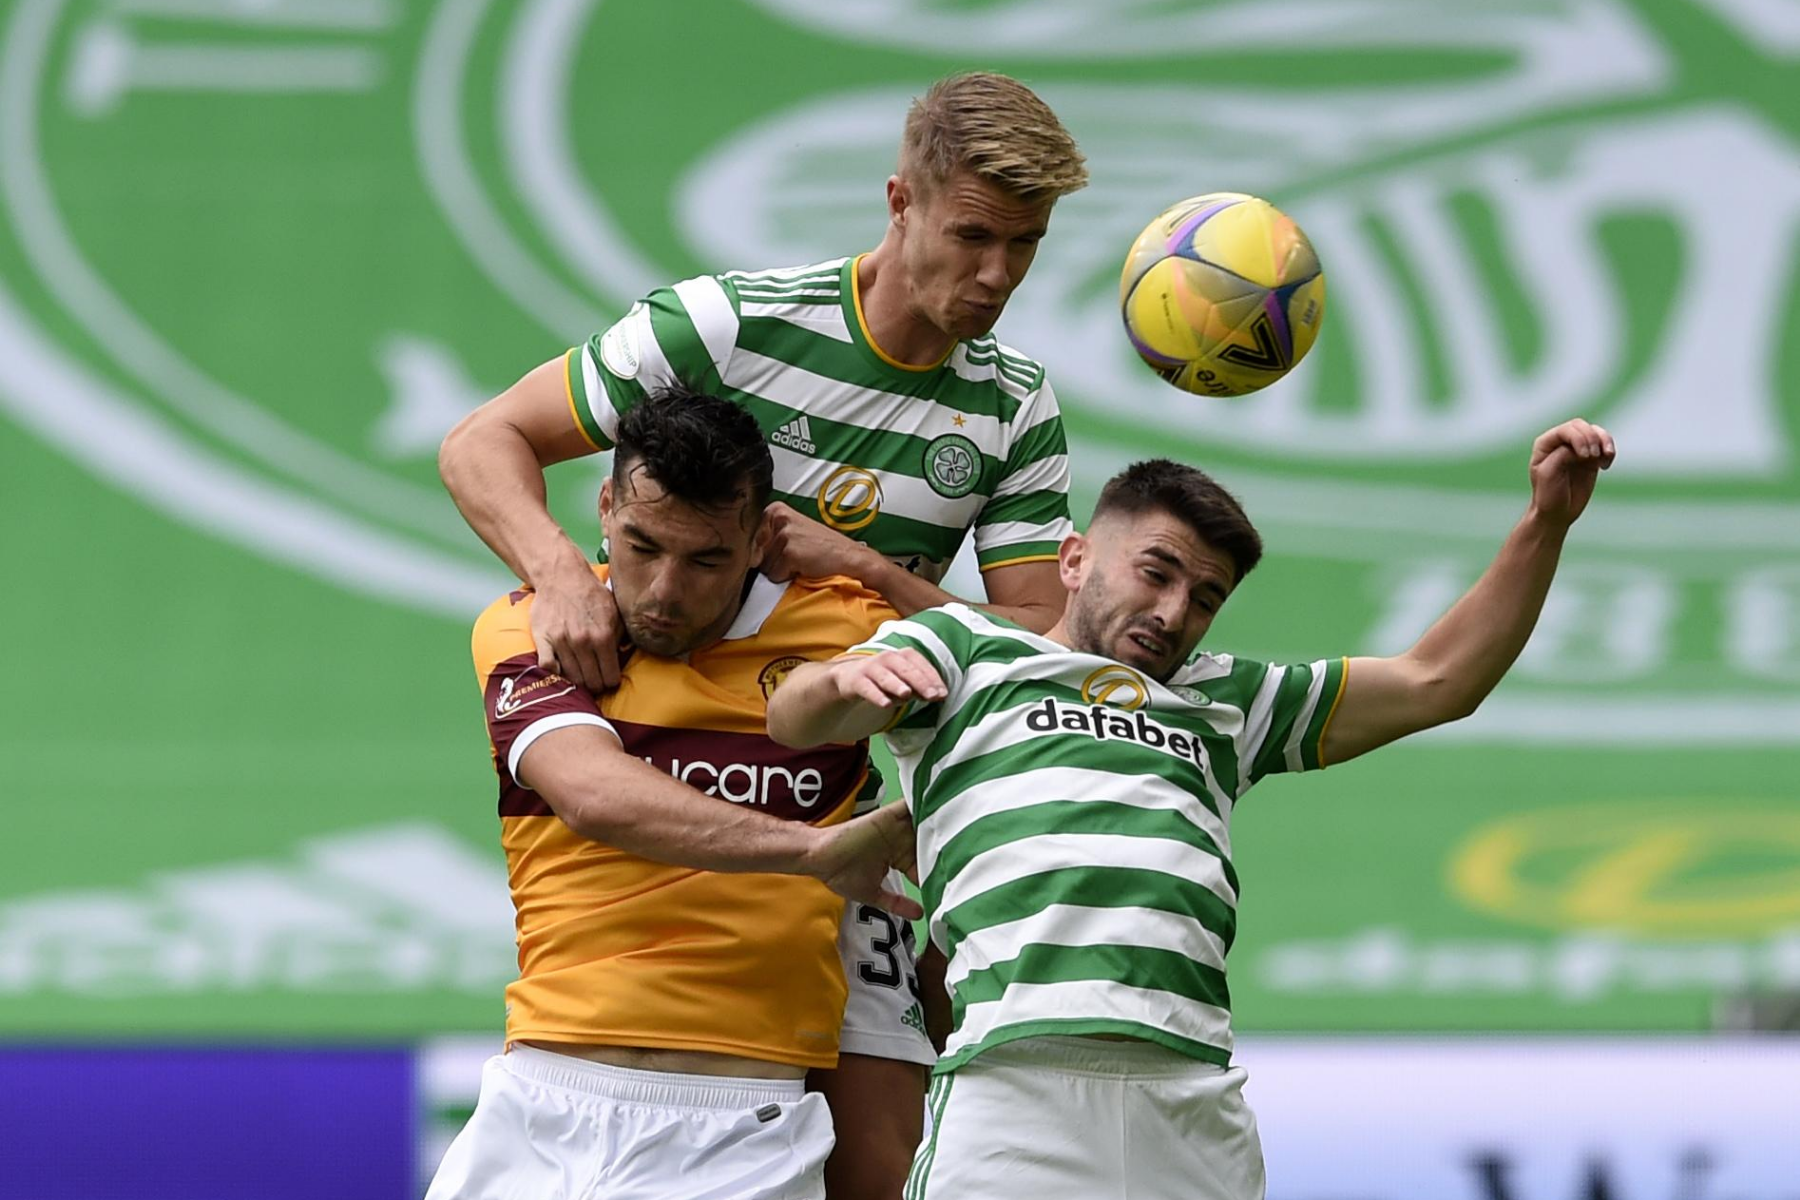 Celtic 1 Motherwell 0 LIVE: James Forrest opens the scoring at Parkhead